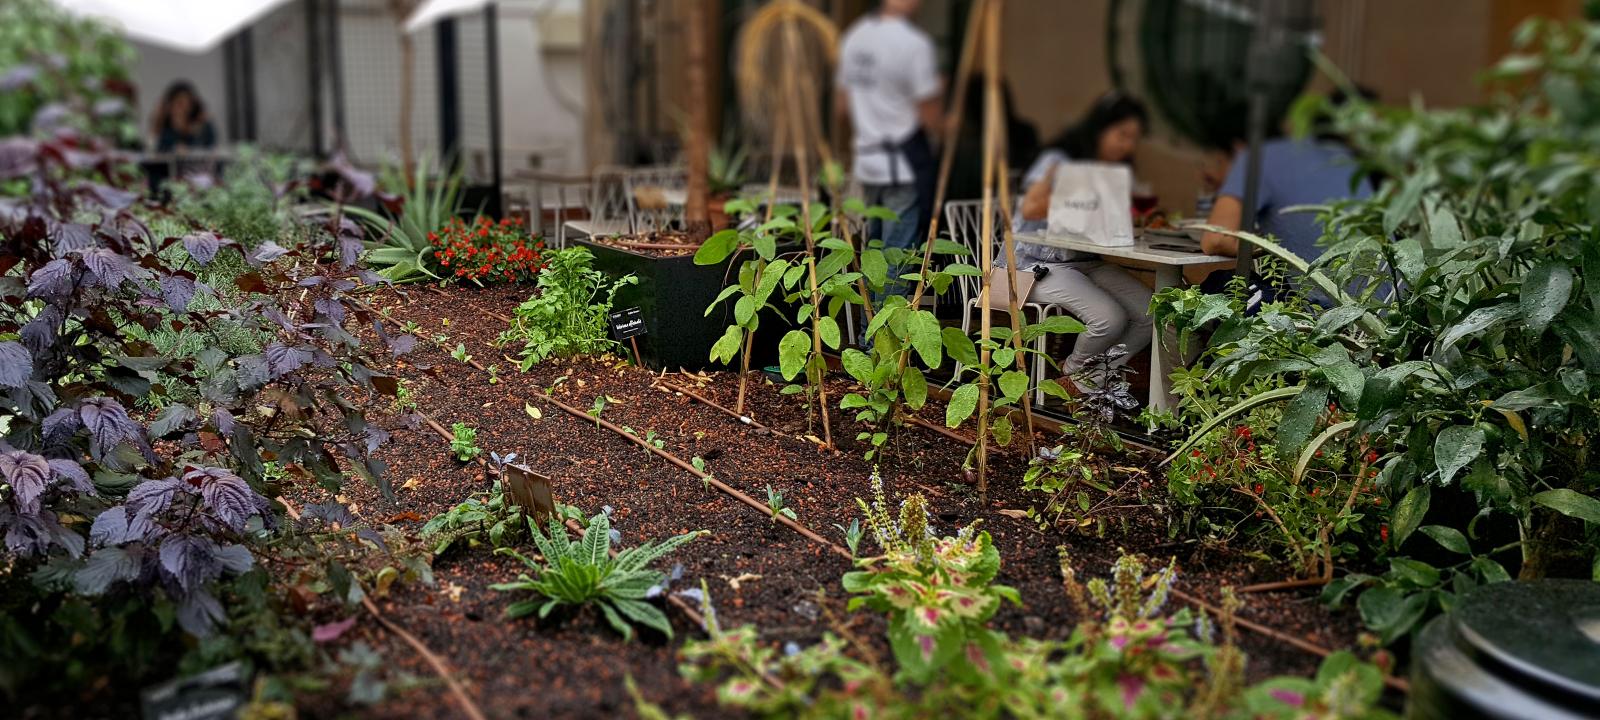 Vegetable patch in the courtyard of a restaurant